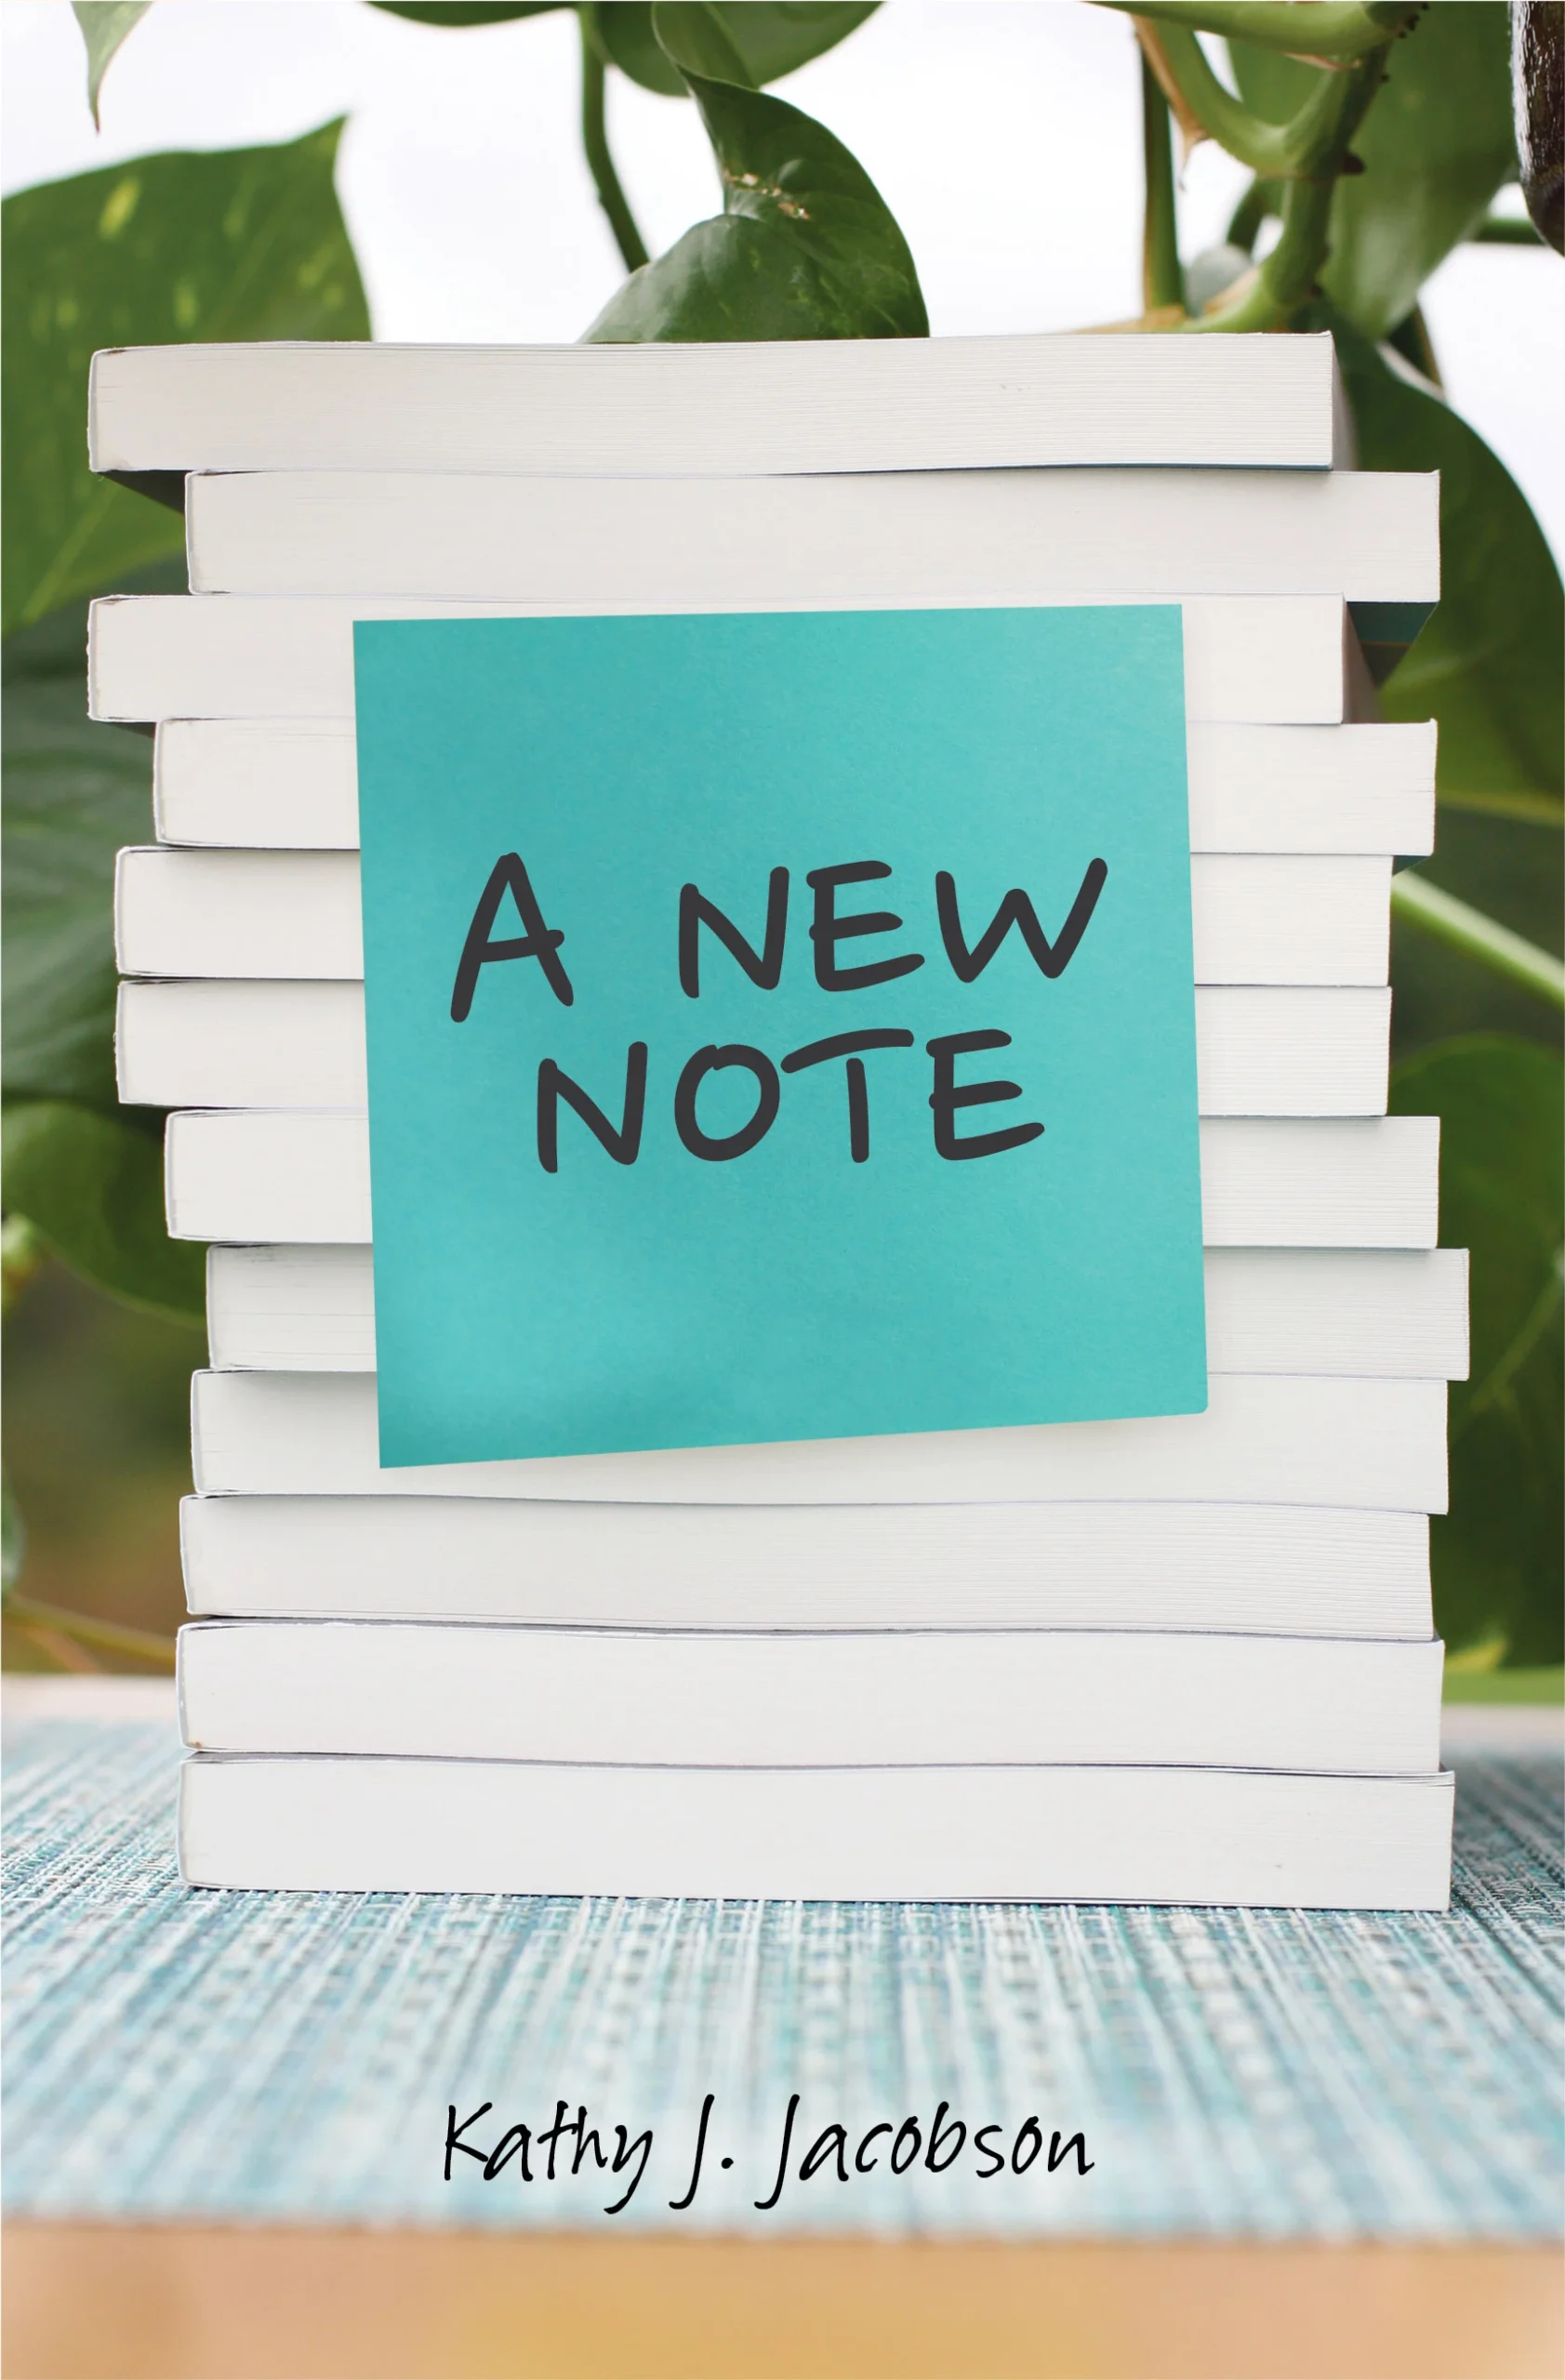 a new note book cover